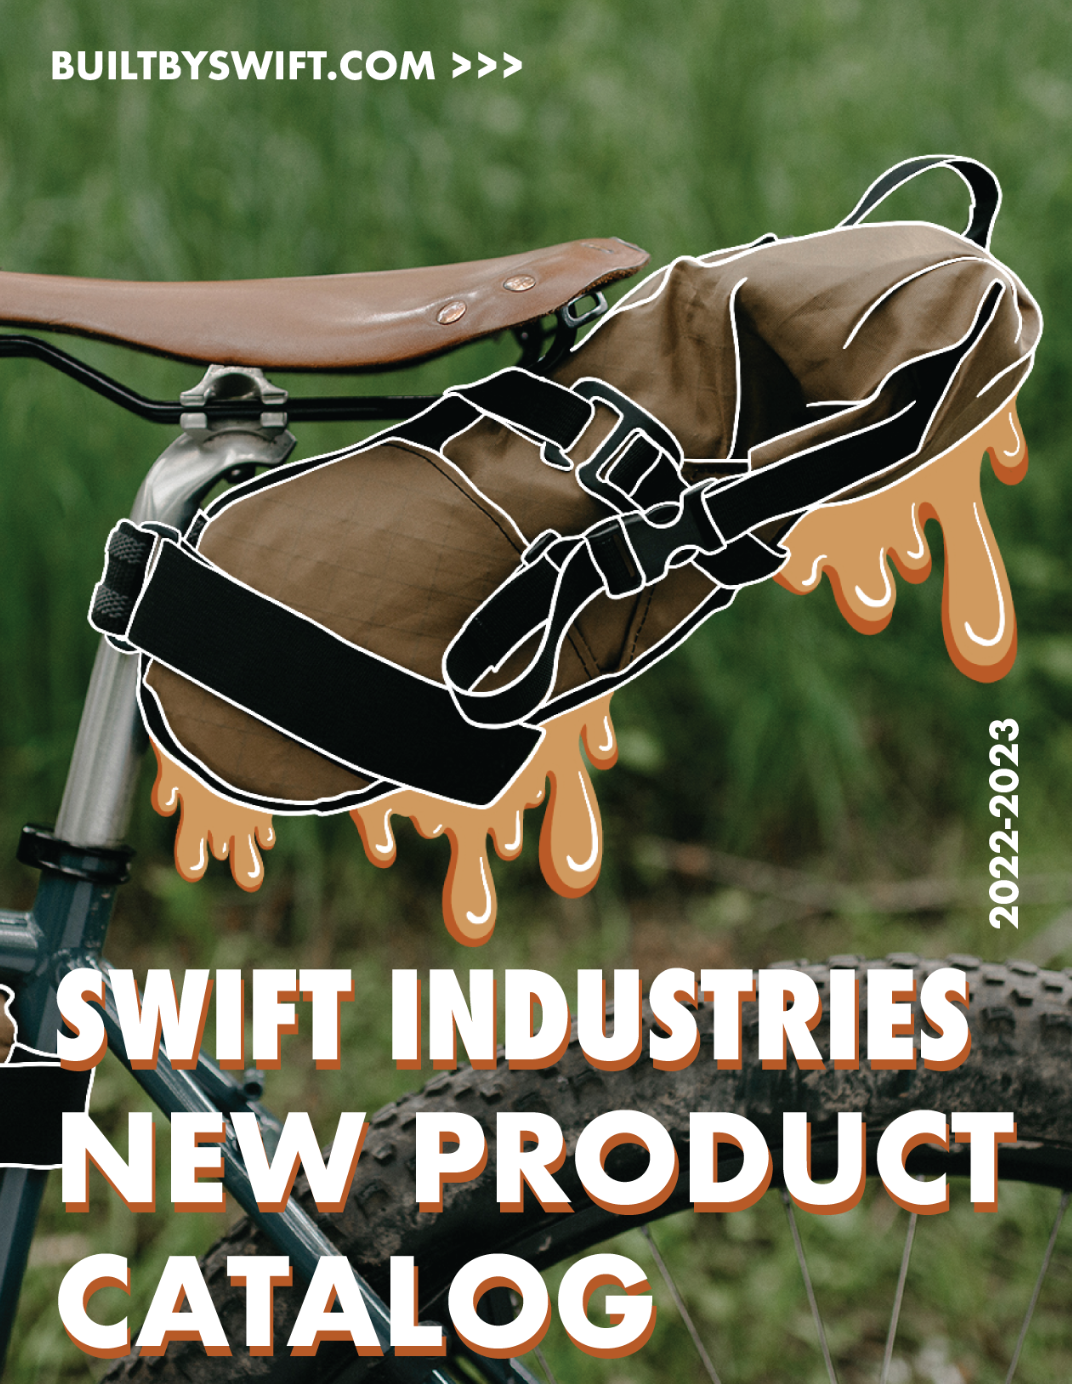 Swift Industries New Product Catalog.png